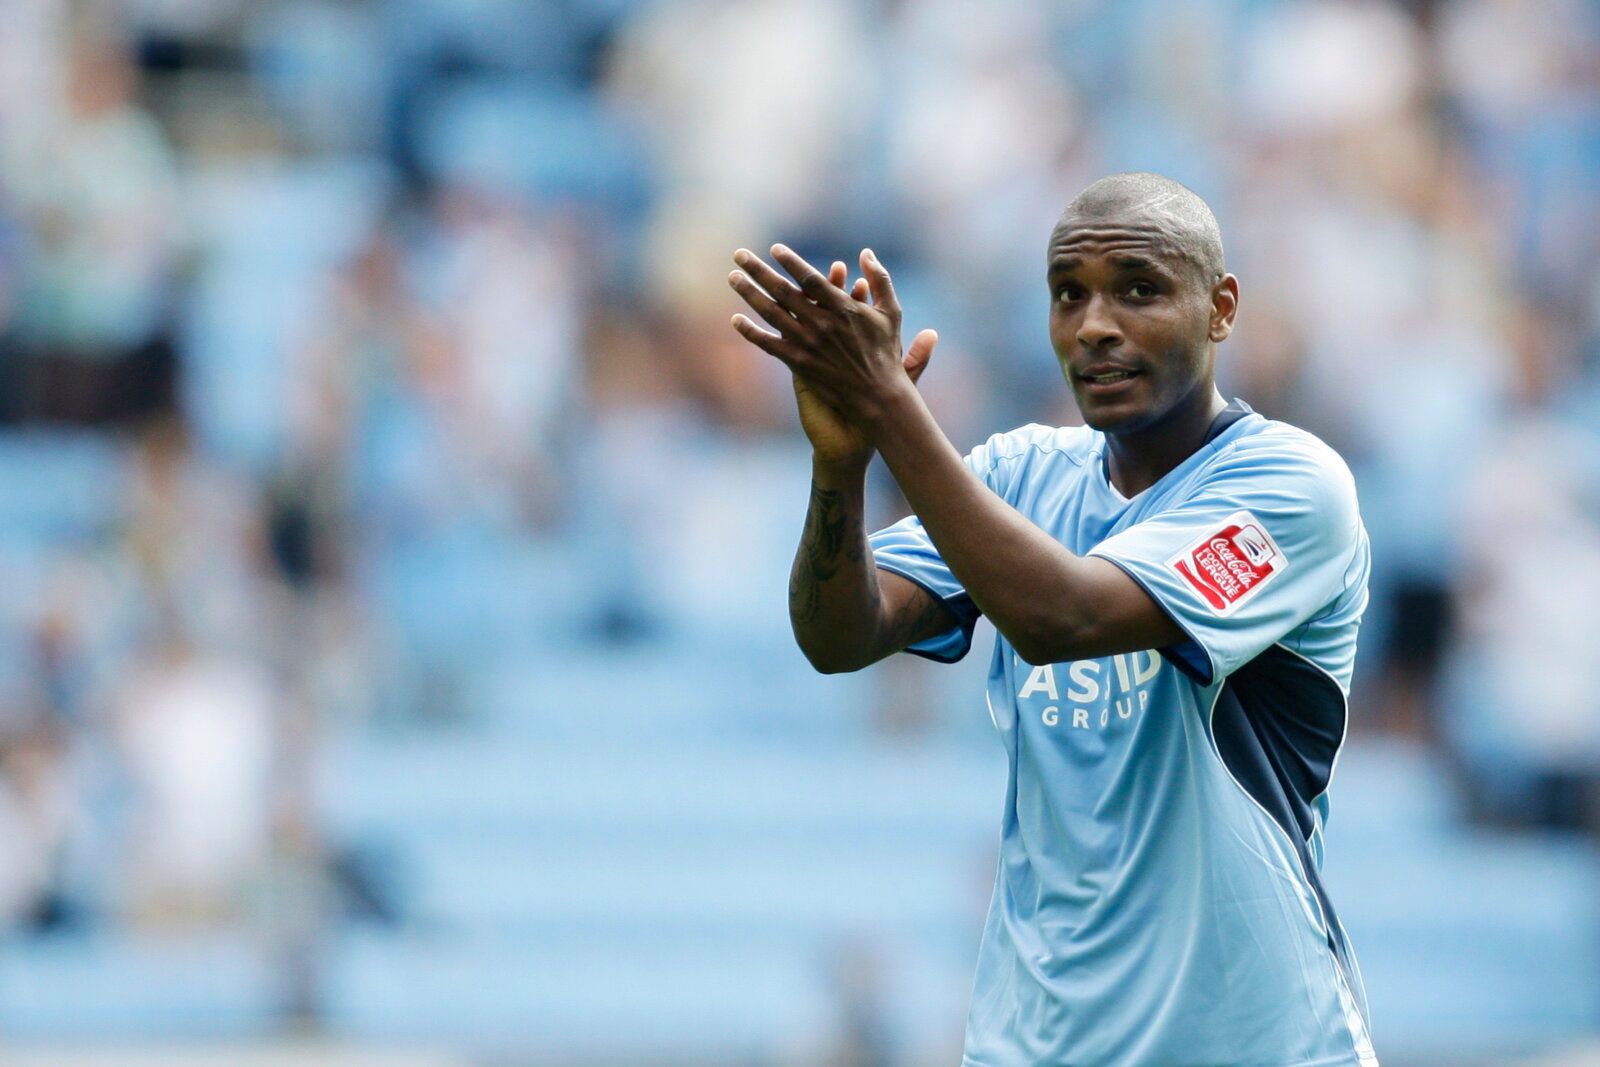 Football - Coventry City v Ipswich Town Coca-Cola Football League Championship  - Ricoh Arena - 09/10 - 9/8/09 
Clinton Morrison of Coventry City celebrates at the end of the match 
Mandatory Credit: Action Images / Andrew Boyers 
Livepic